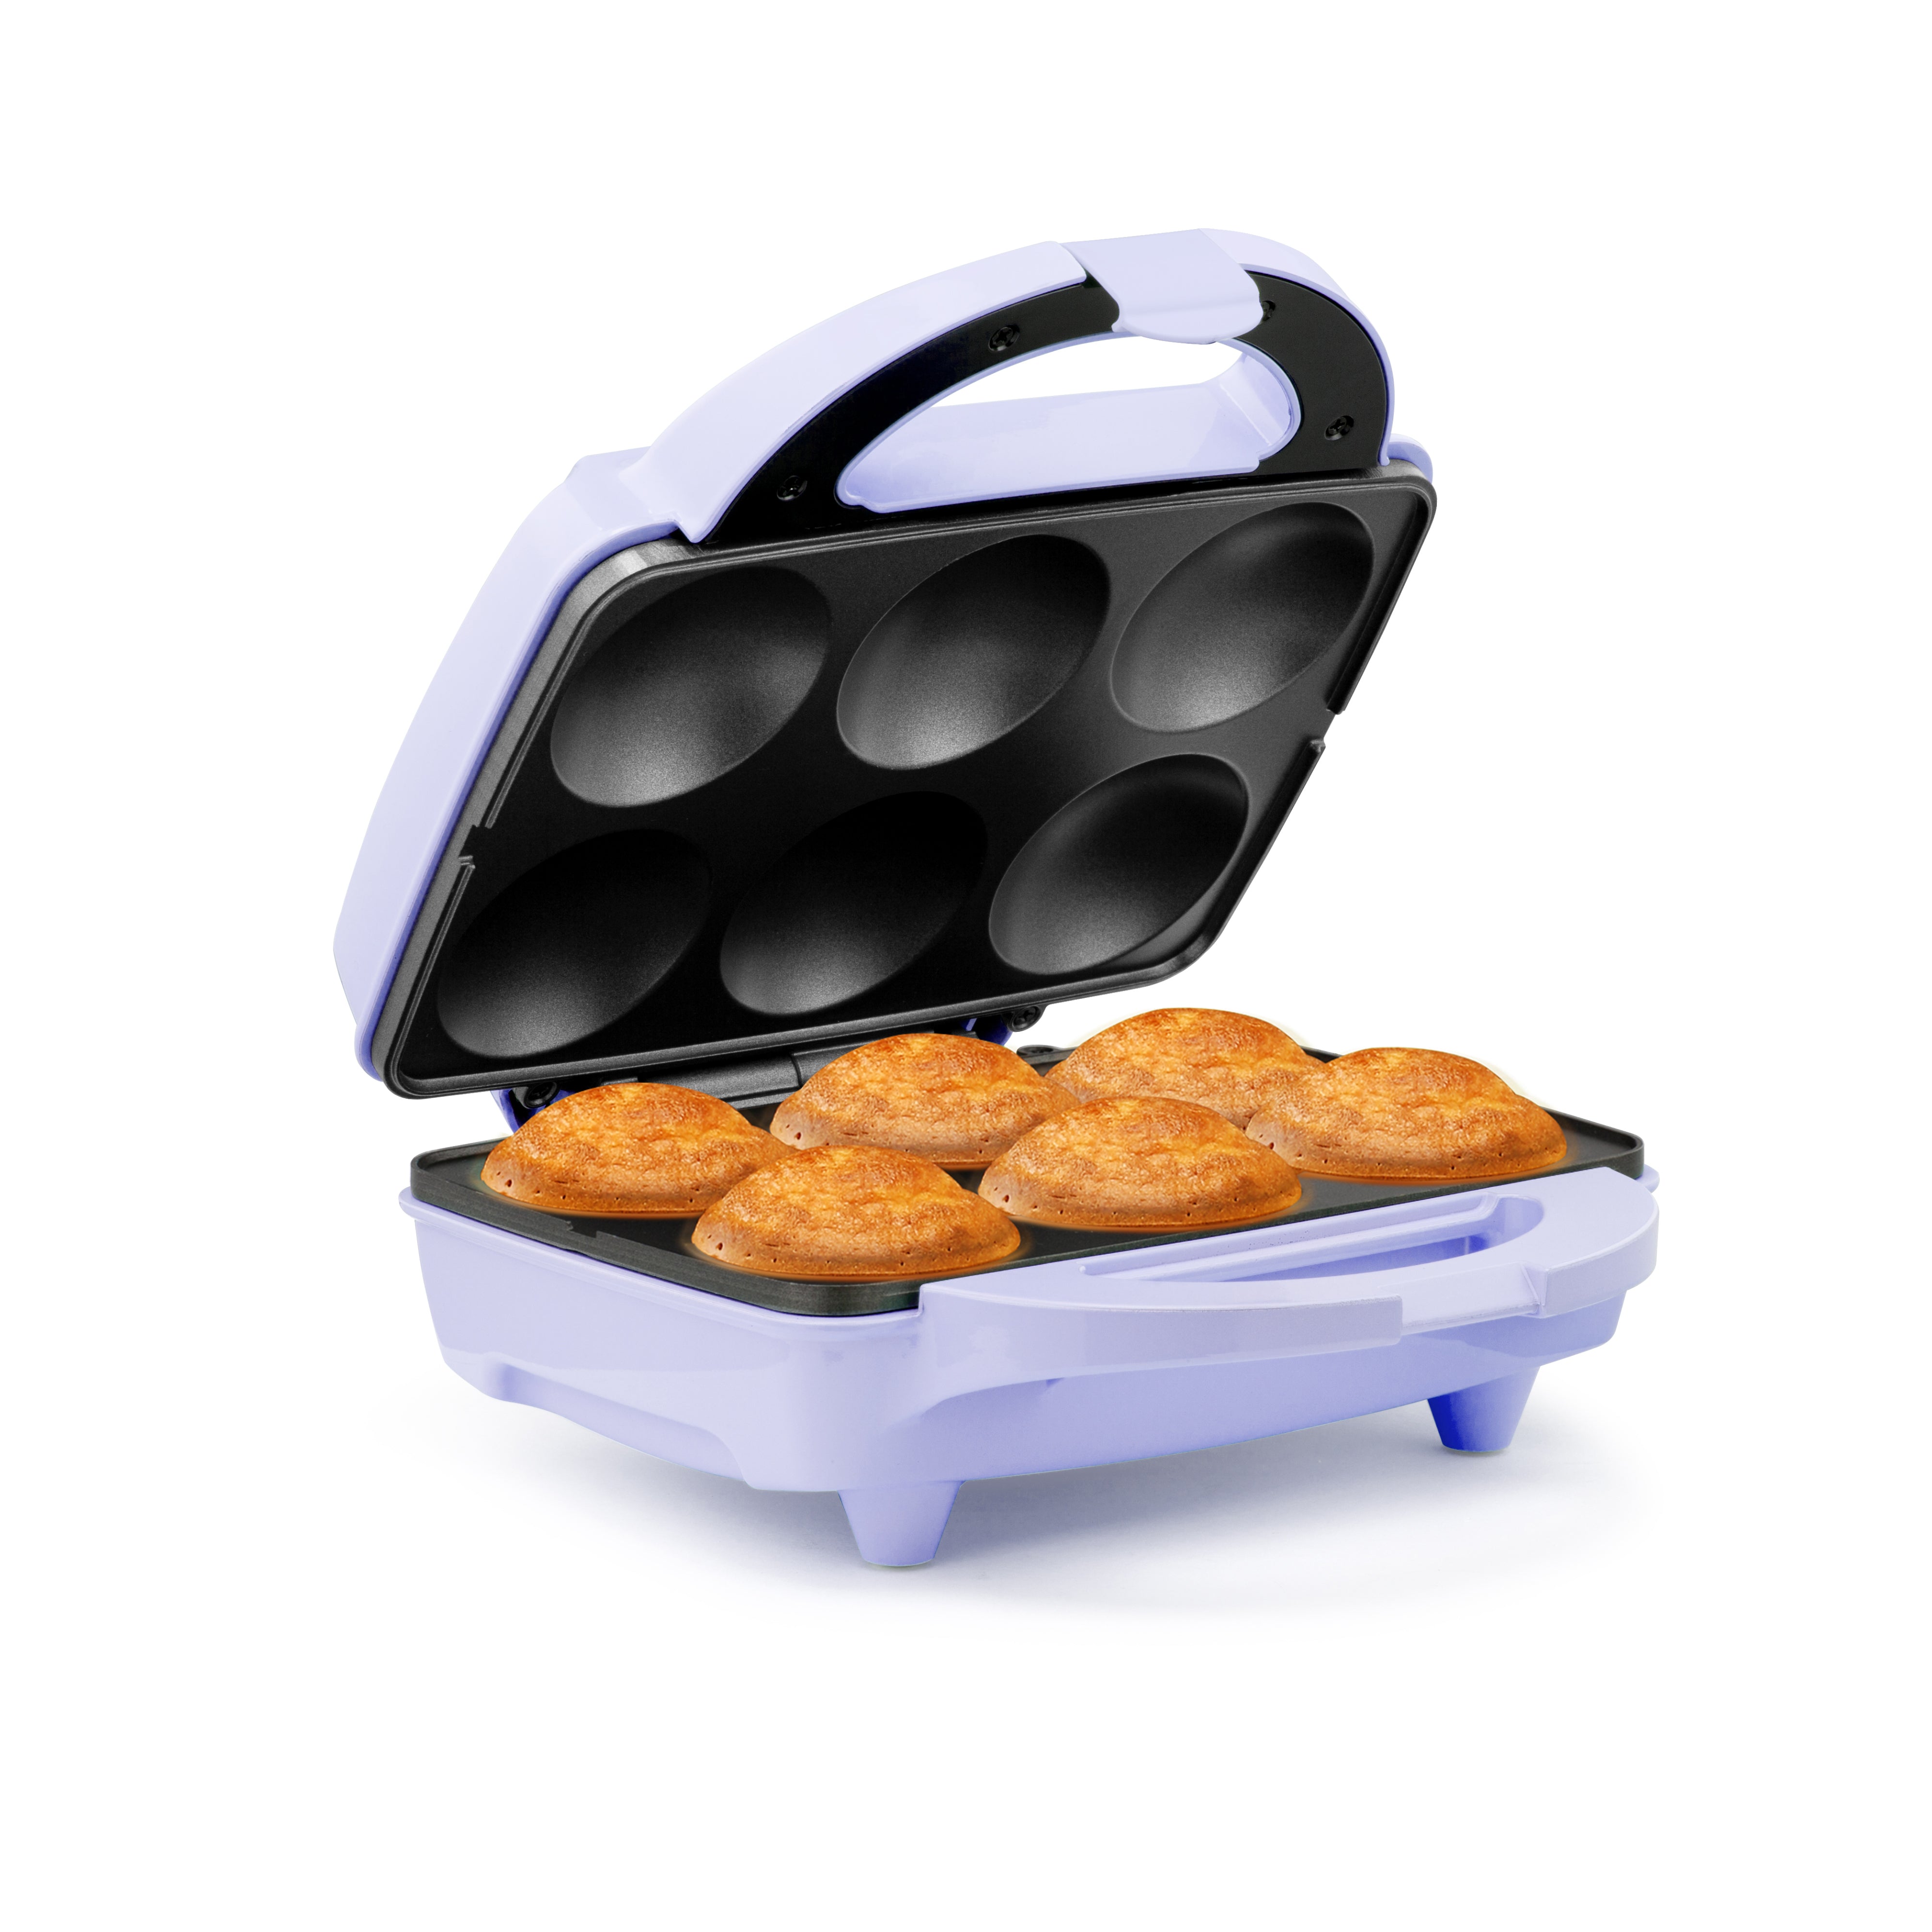  Holstein Housewares - Non-Stick Electric Arepa Maker, Bakes  Arepas, Eggs, Cookies and More, Makes 2, Black: Home & Kitchen